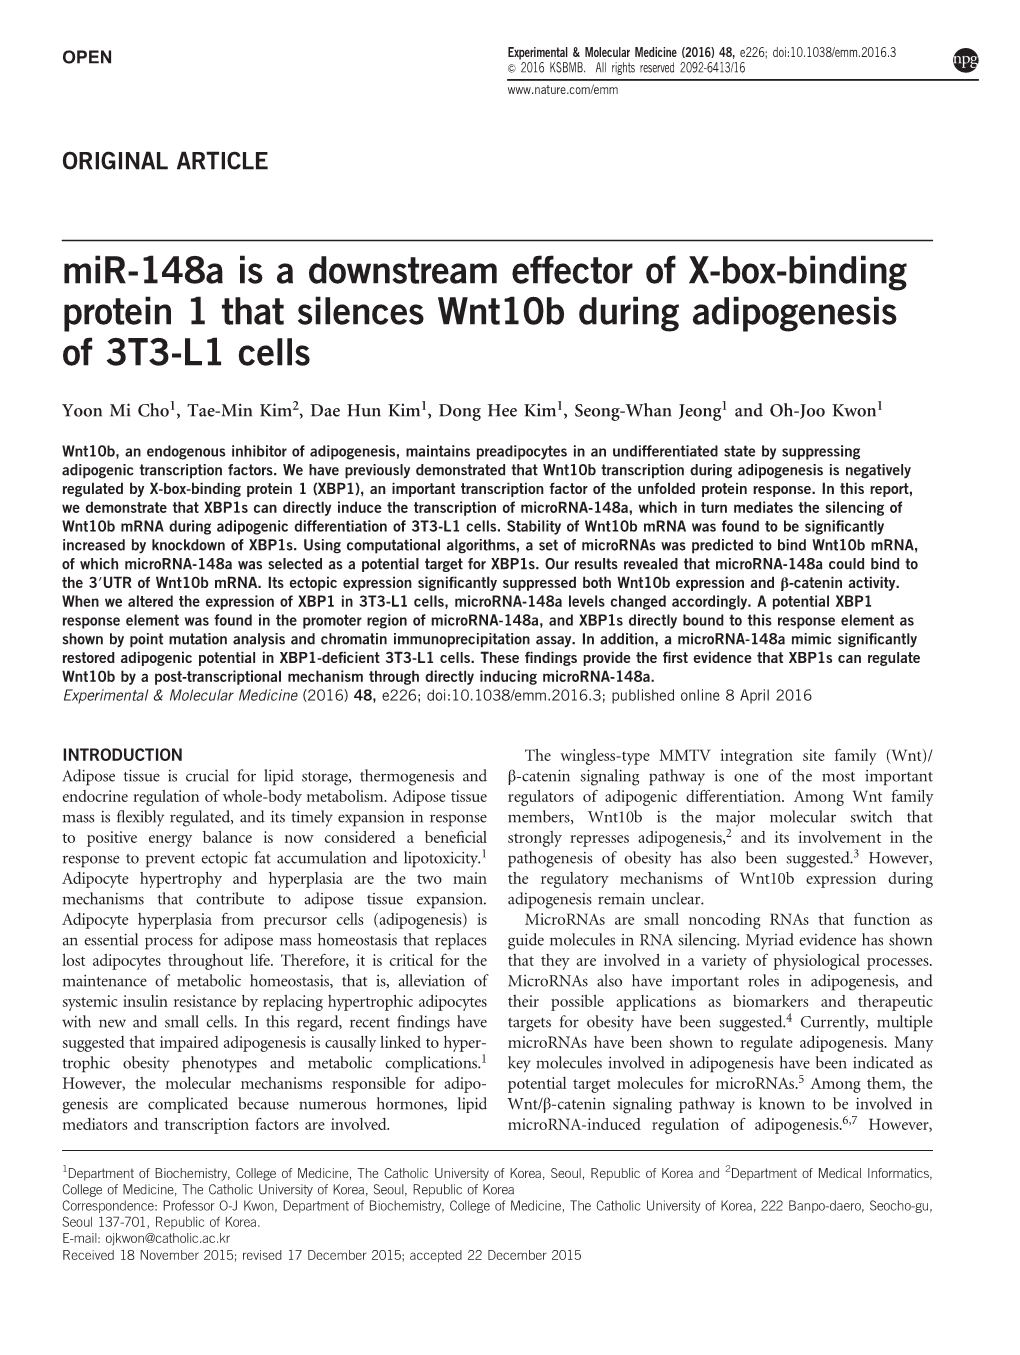 Mir-148A Is a Downstream Effector of X-Box-Binding Protein 1 That Silences Wnt10b During Adipogenesis of 3T3-L1 Cells